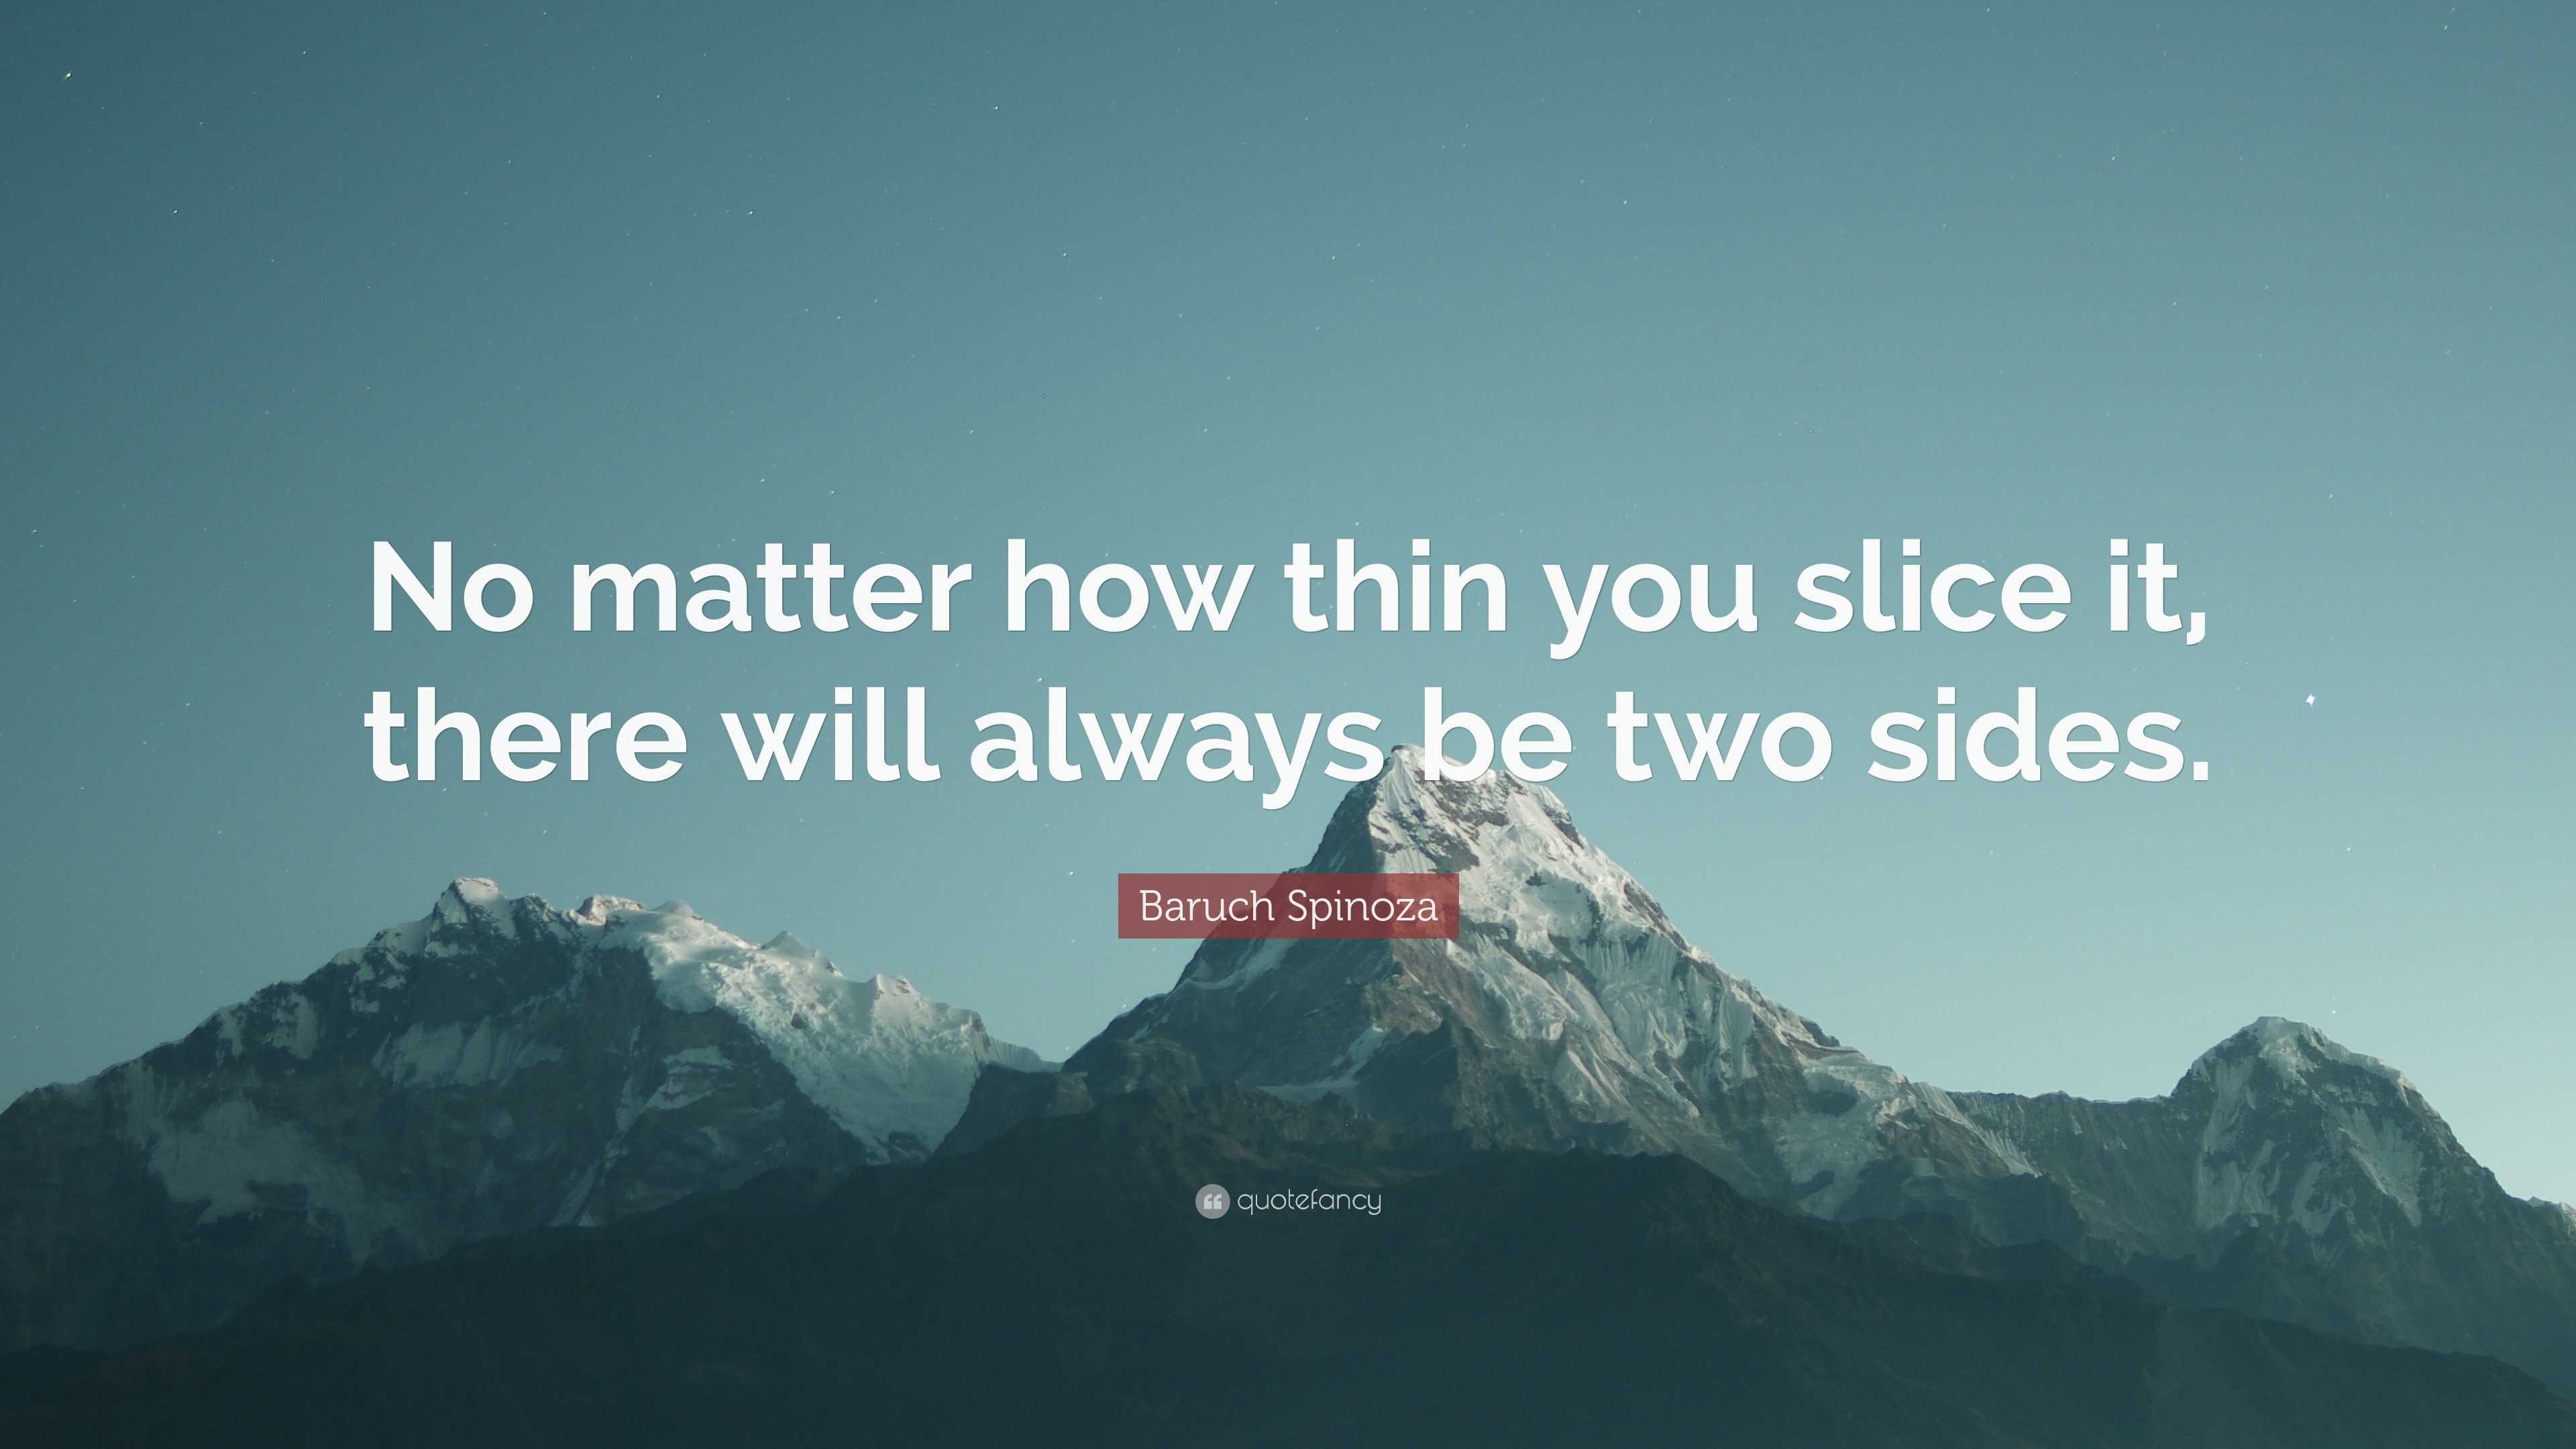 Baruch Spinoza Quote No Matter How Thin You Slice It There Will Always Be Two Sides 12 Wallpapers Quotefancy